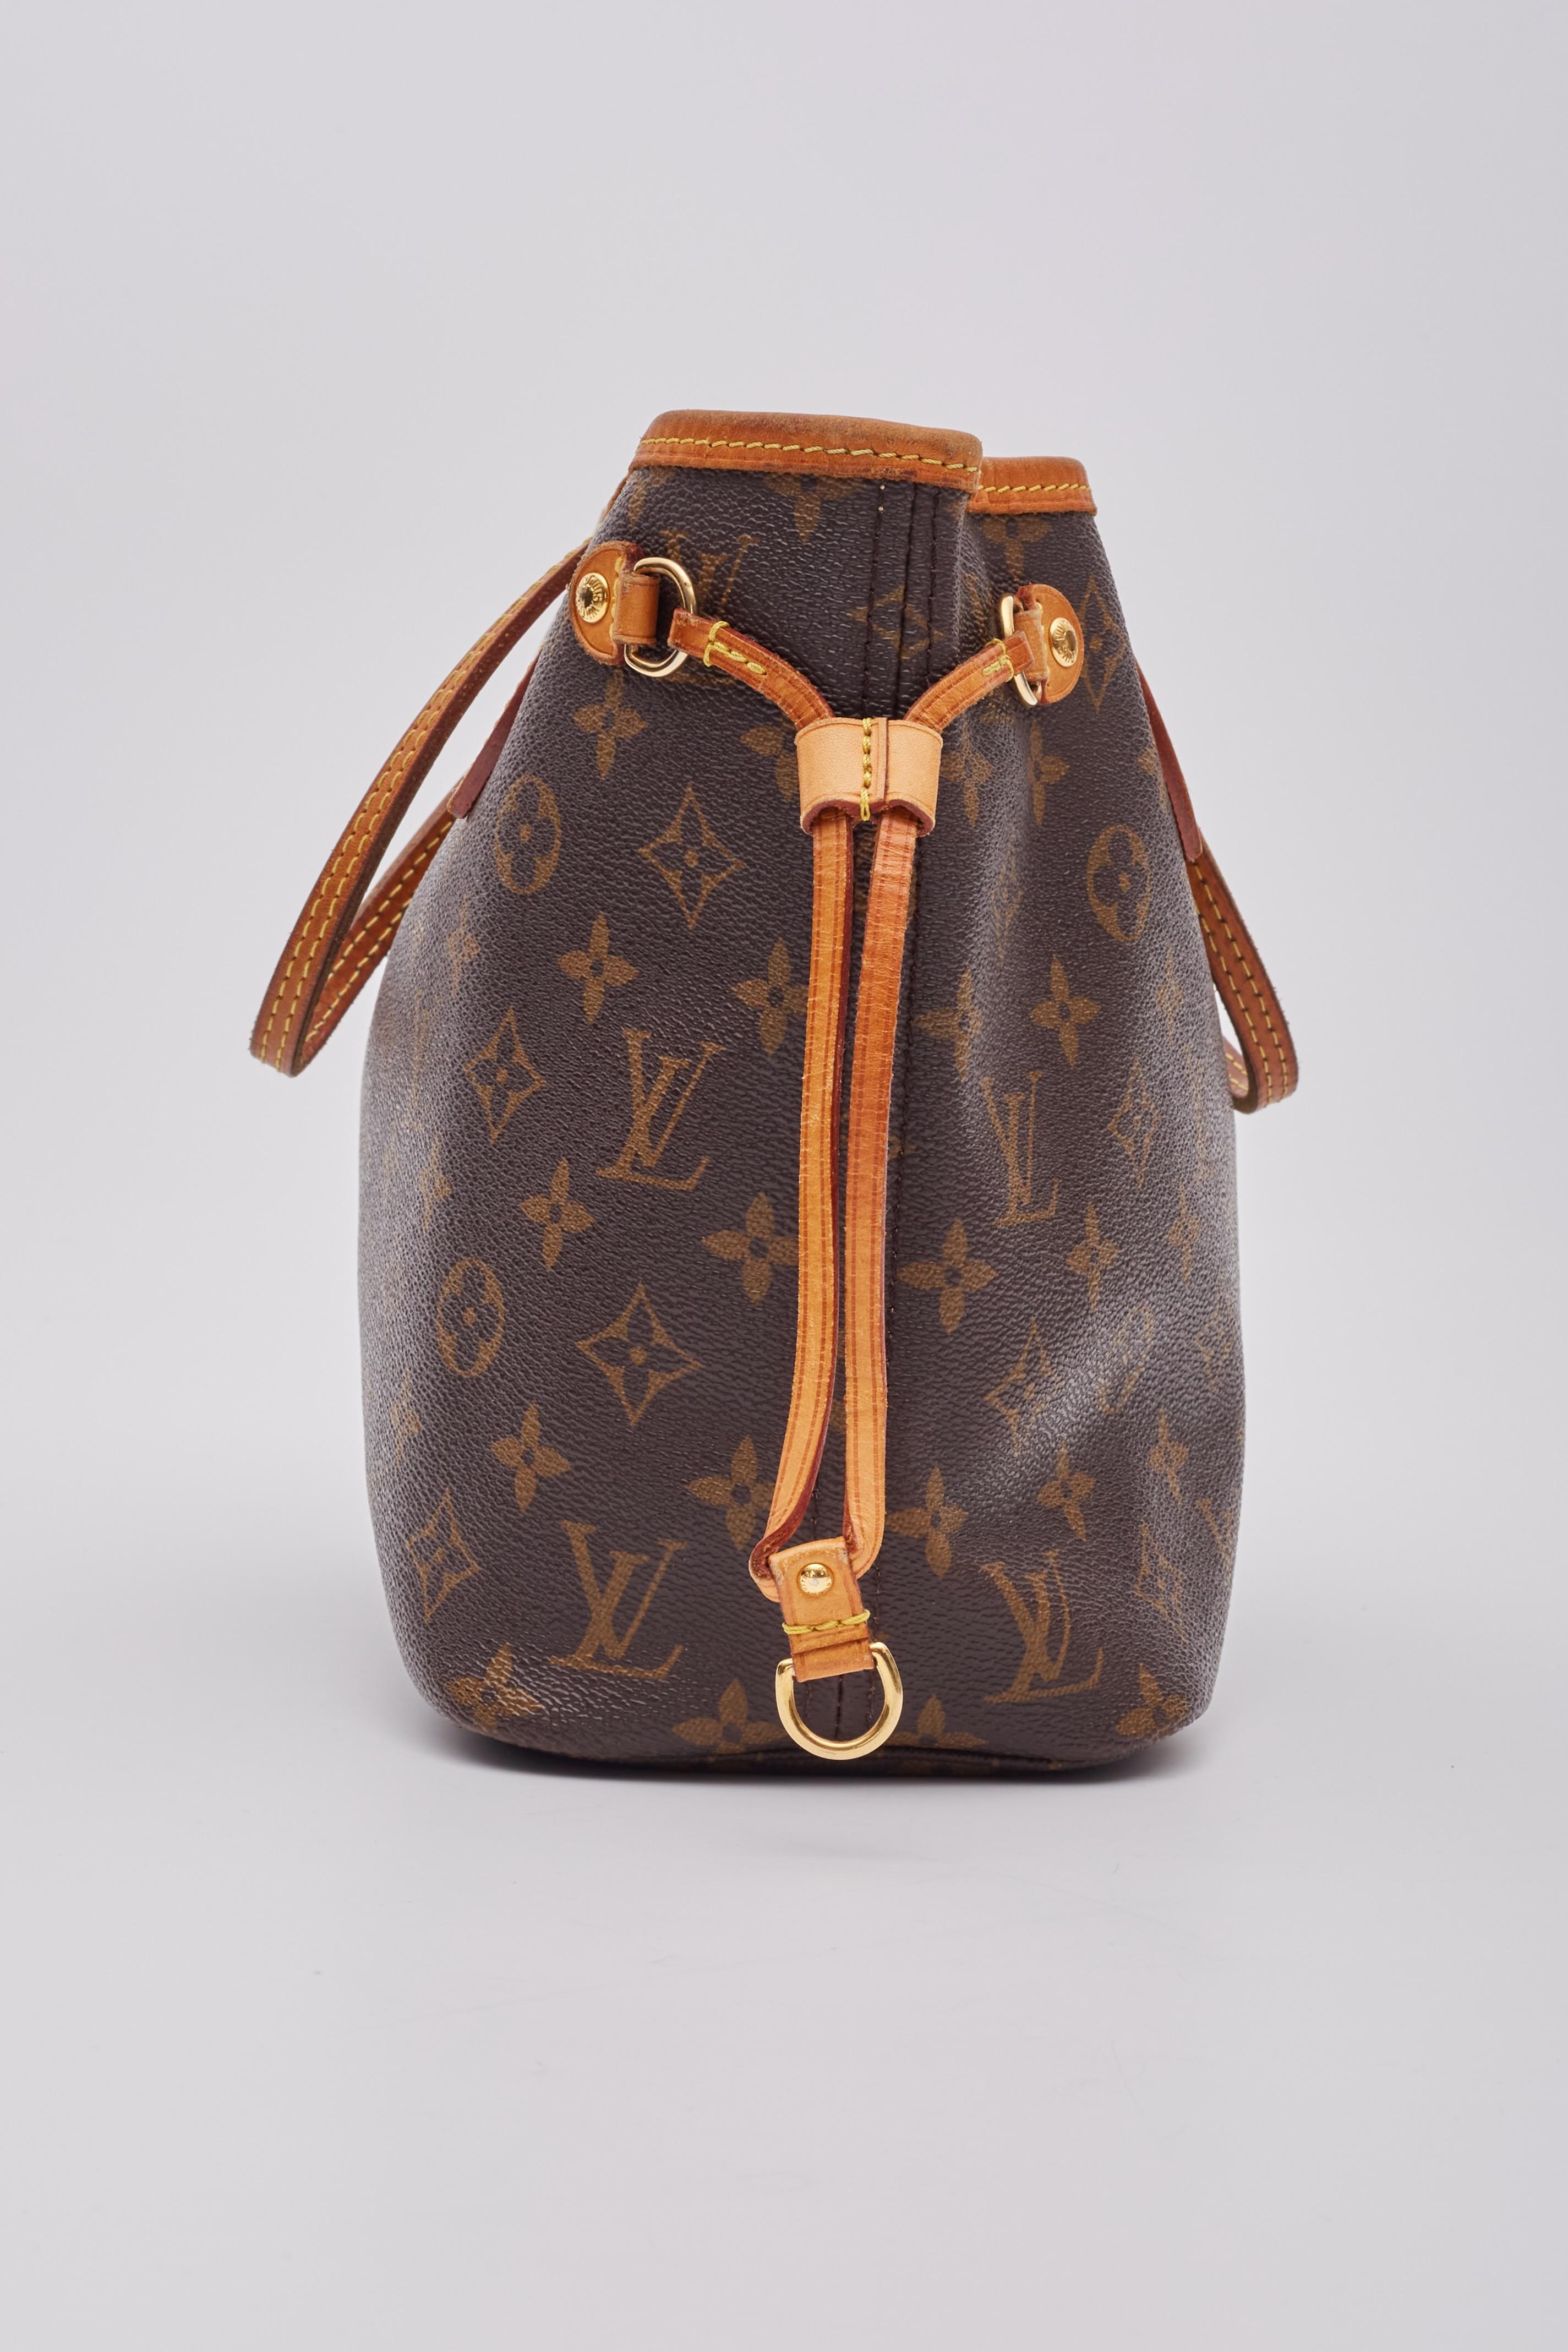 Louis Vuitton Monogram Neverfull Tote Pm Discontinued For Sale 3